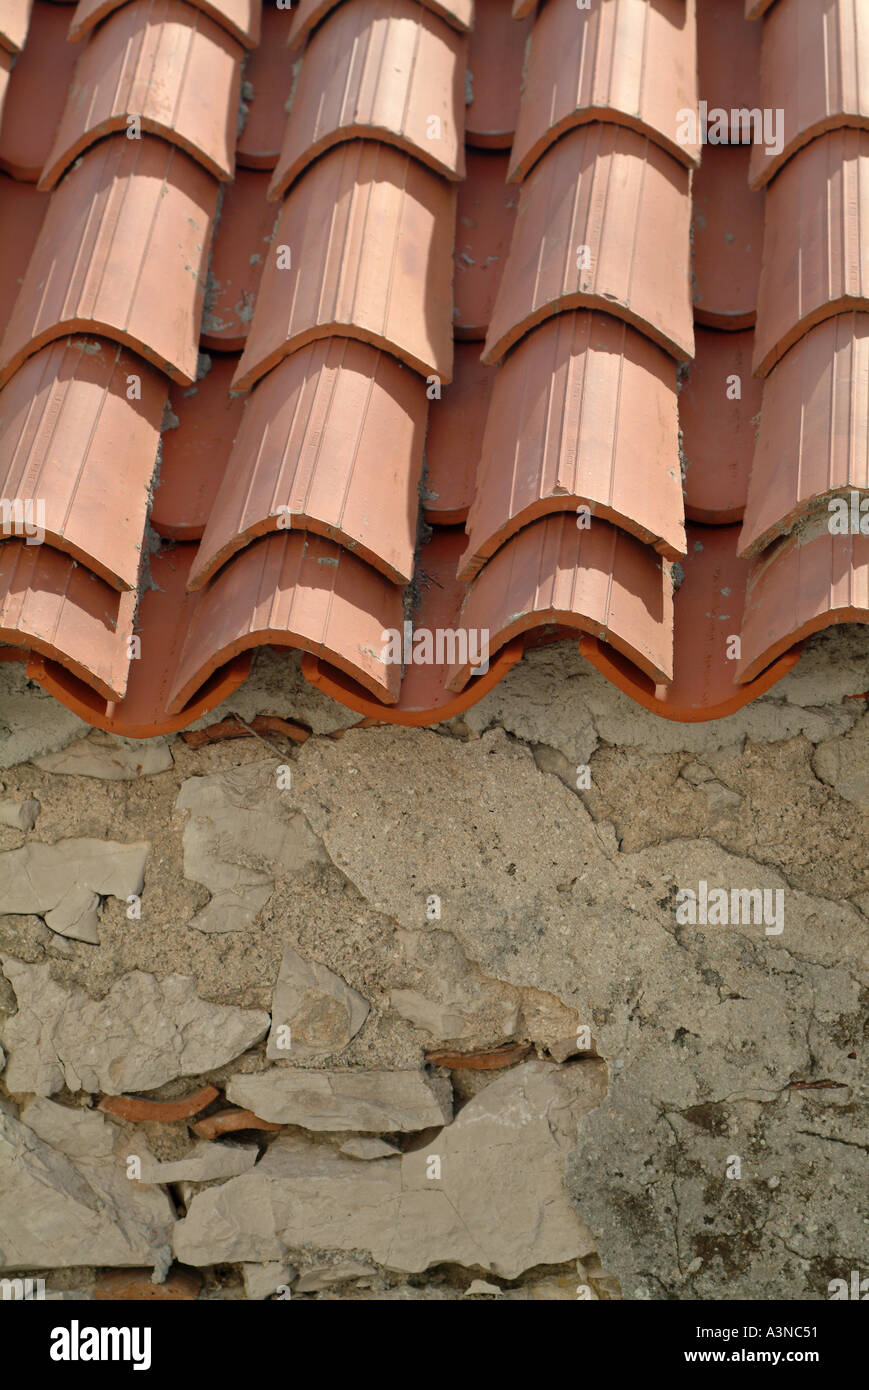 Red Roof Tiles and Old Wall on Building in Tribunj Croatia Stock Photo